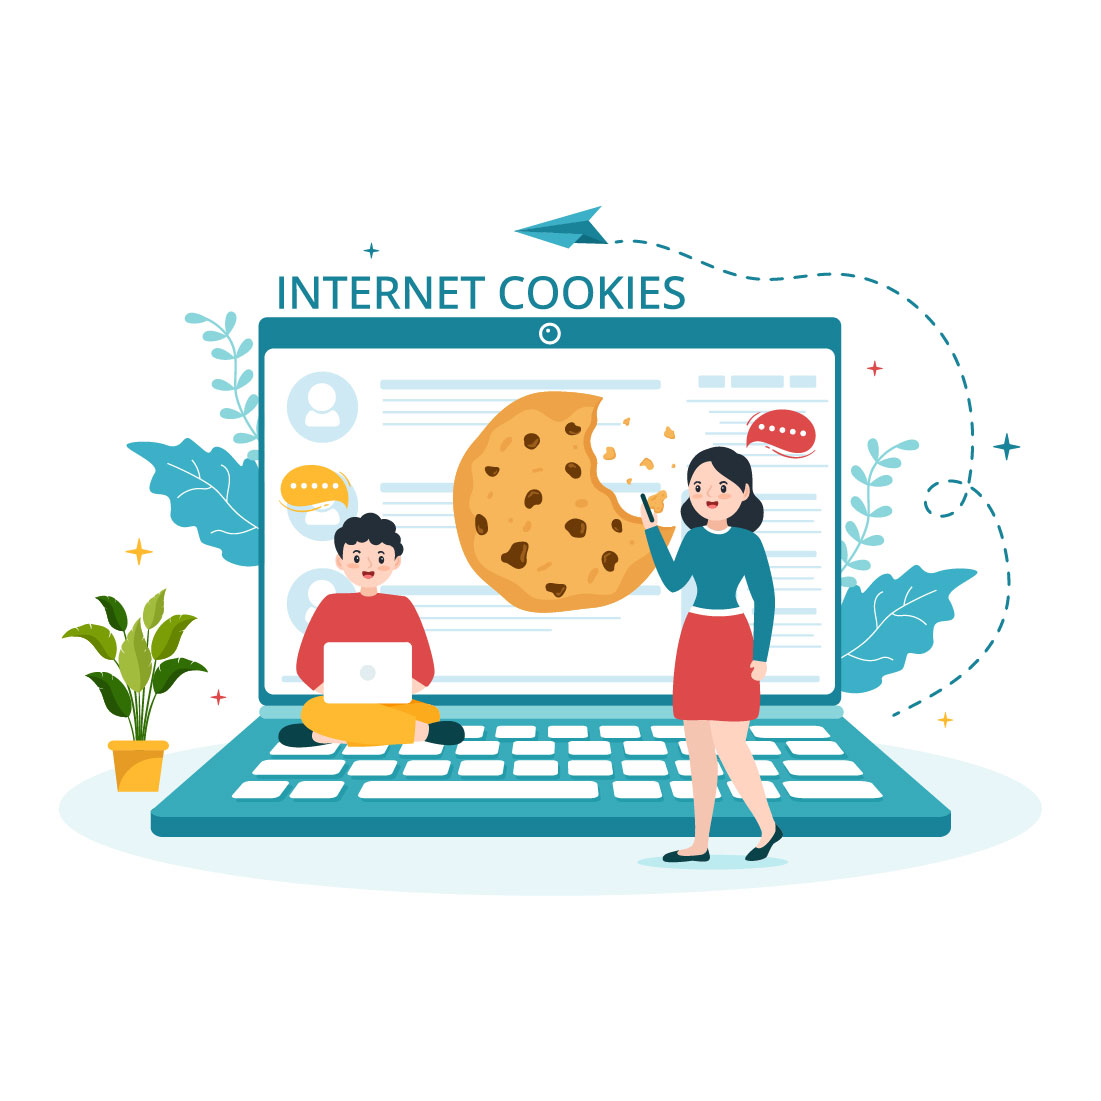 12 Internet Cookies Technology Illustration cover image.